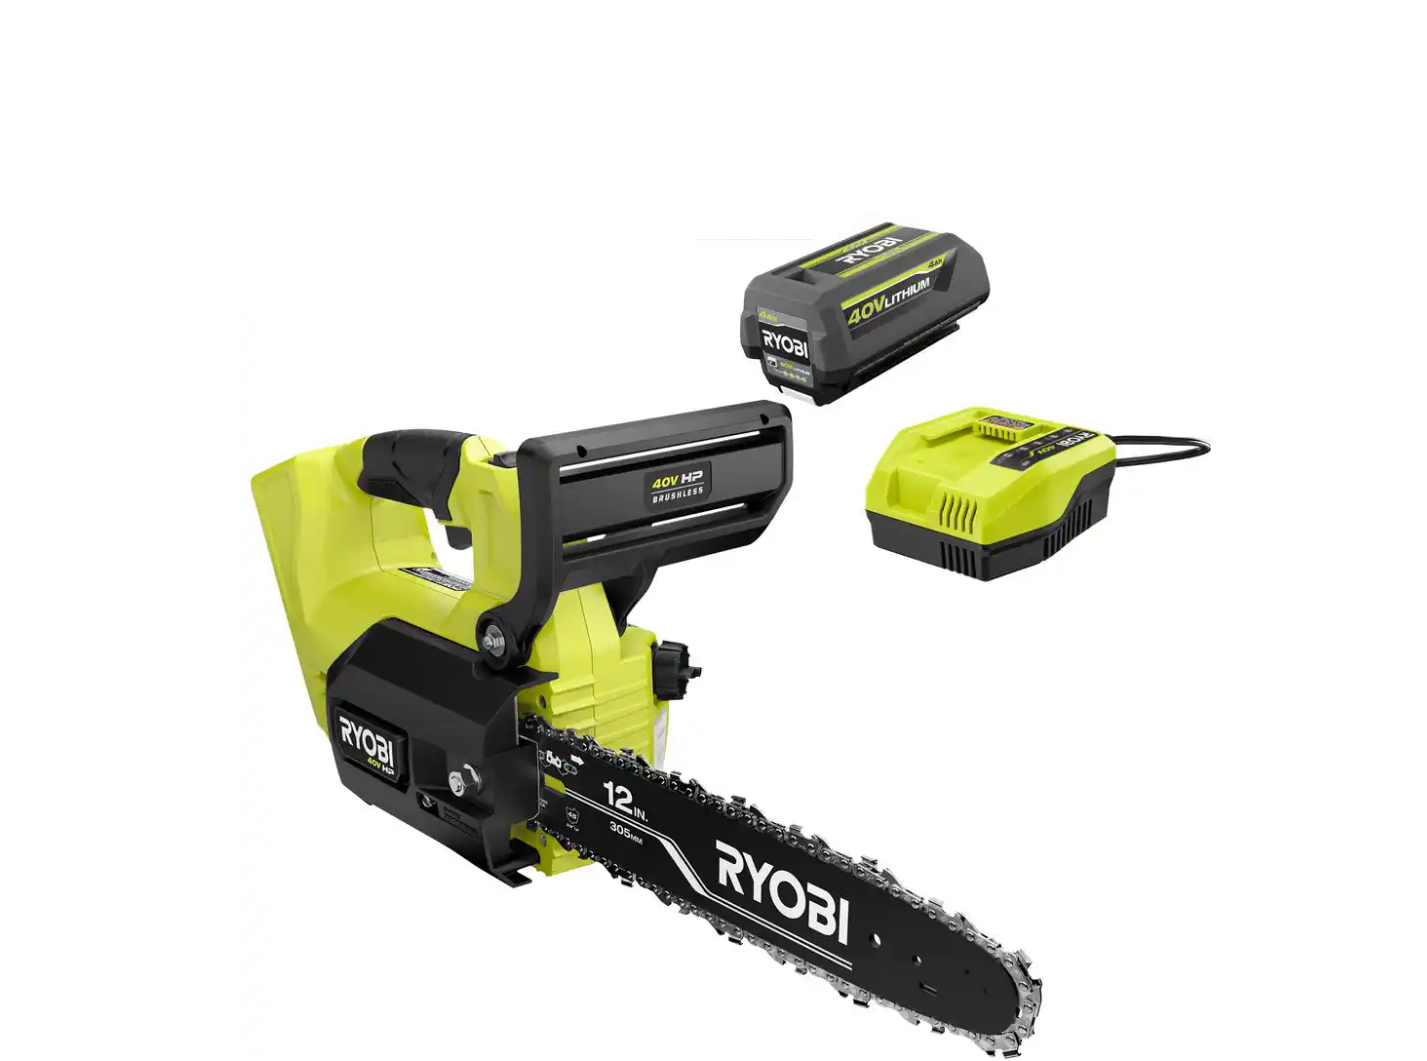 https://bigbigmart.com/wp-content/uploads/2022/07/RYOBI-RY40590-40V-HP-Brushless-12-in.-Top-Handle-Cordless-Battery-Chainsaw-with-4.0-Battery-and-Charger-1.png